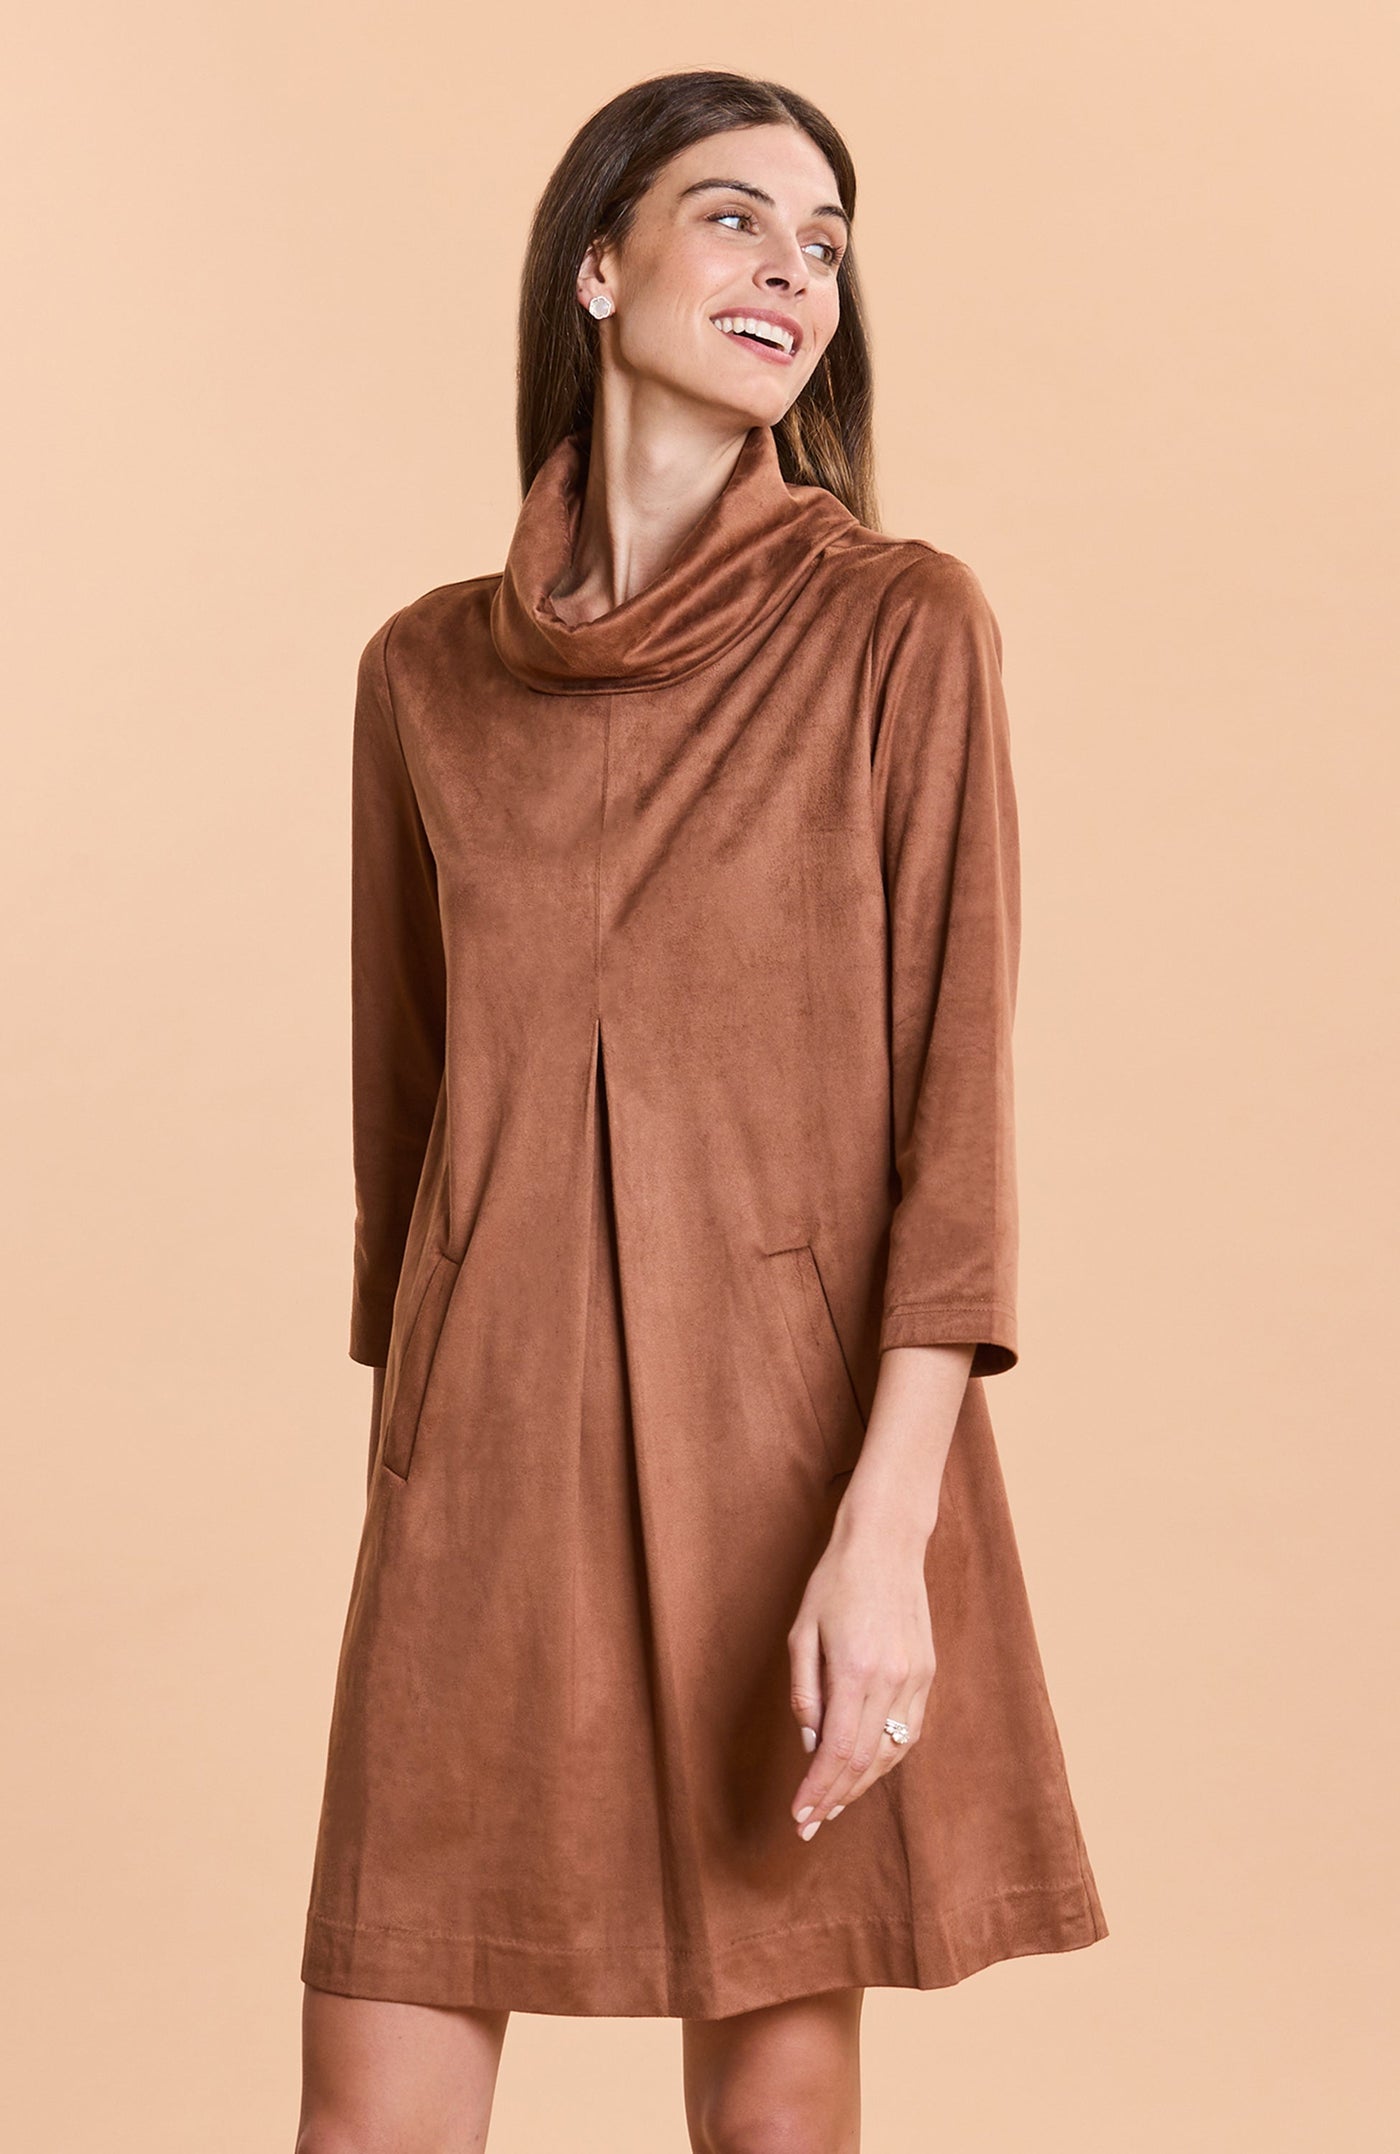 Tyler Böe Kim Cowl Faux Suede Dress in Saddle